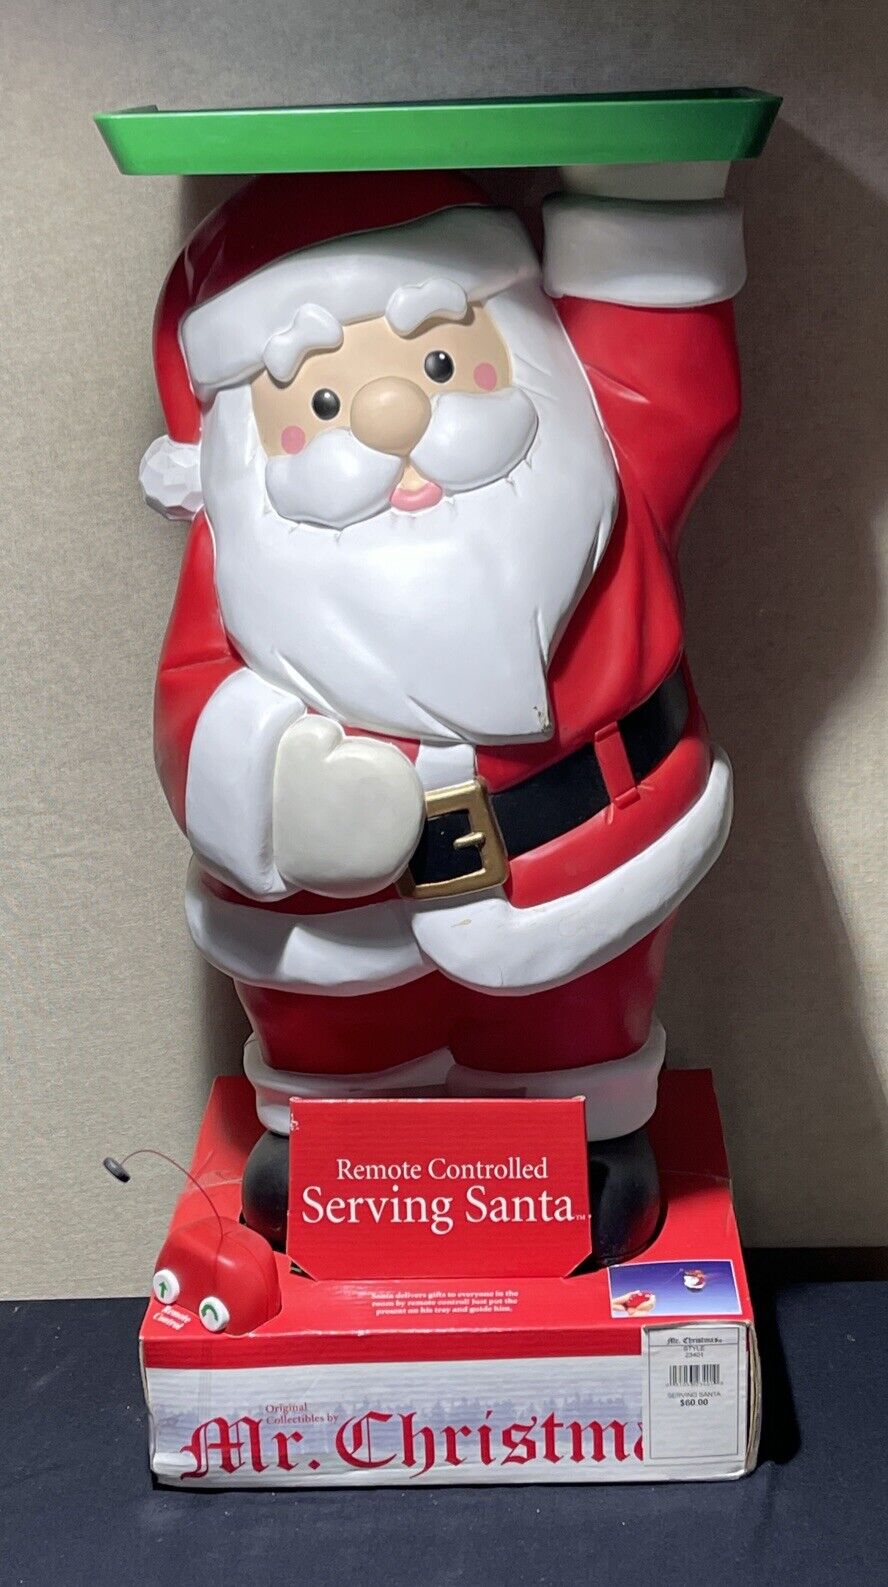 New Old Stock Vintage Mr. Christmas Serving Tray Santa with Remote Control